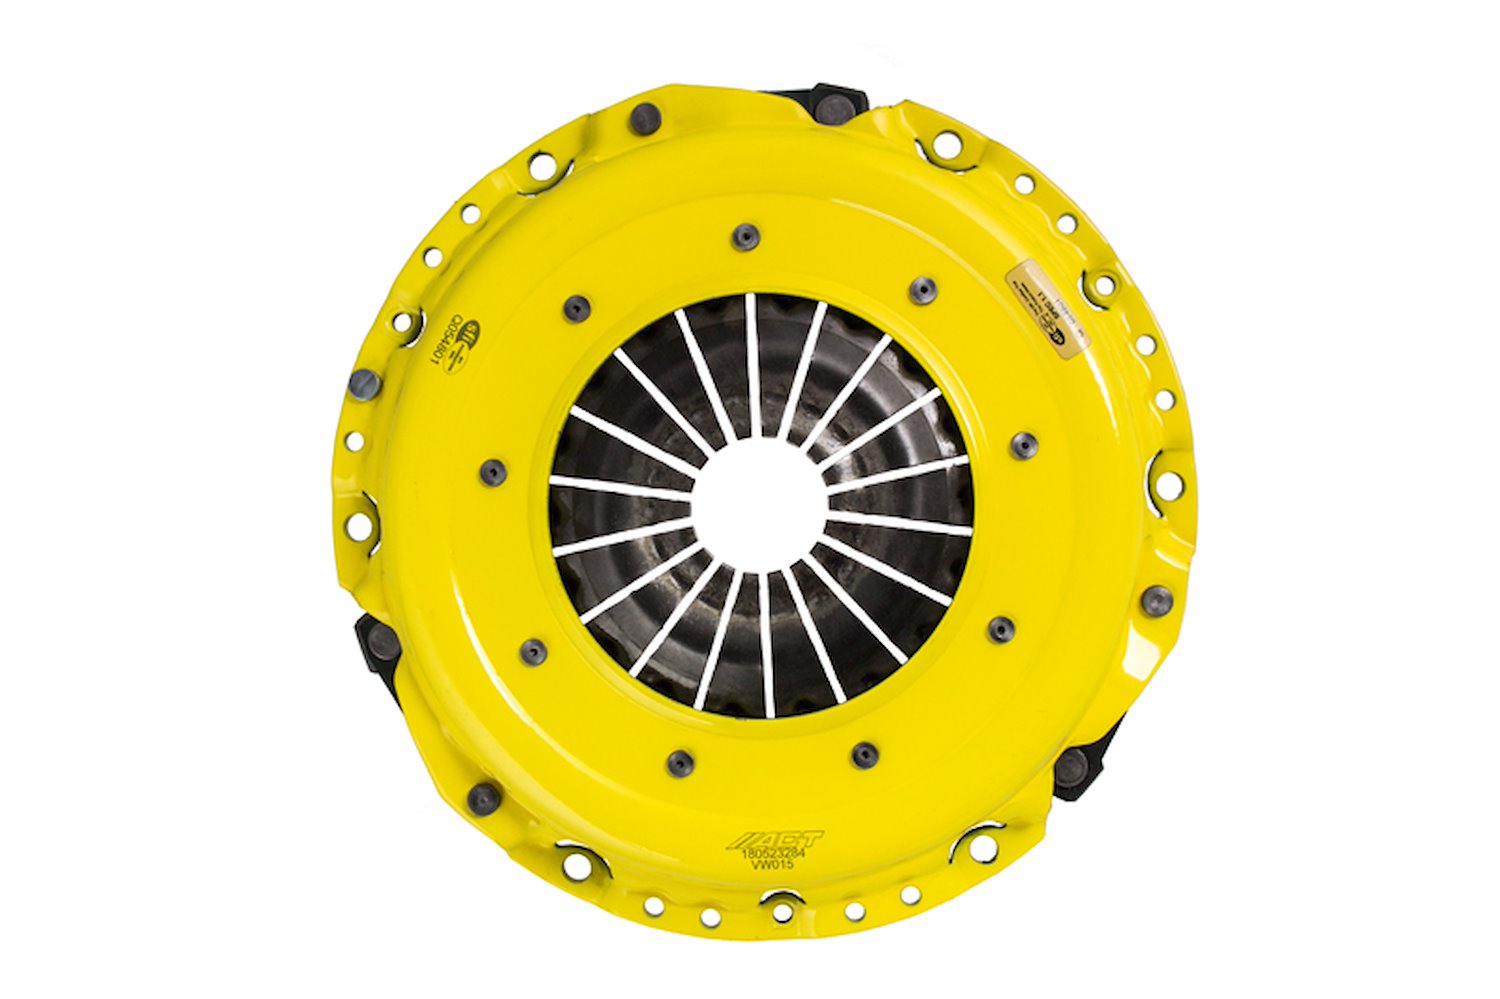 Xtreme Transmission Clutch Pressure Plate Fits Select Audi/Volkswagen